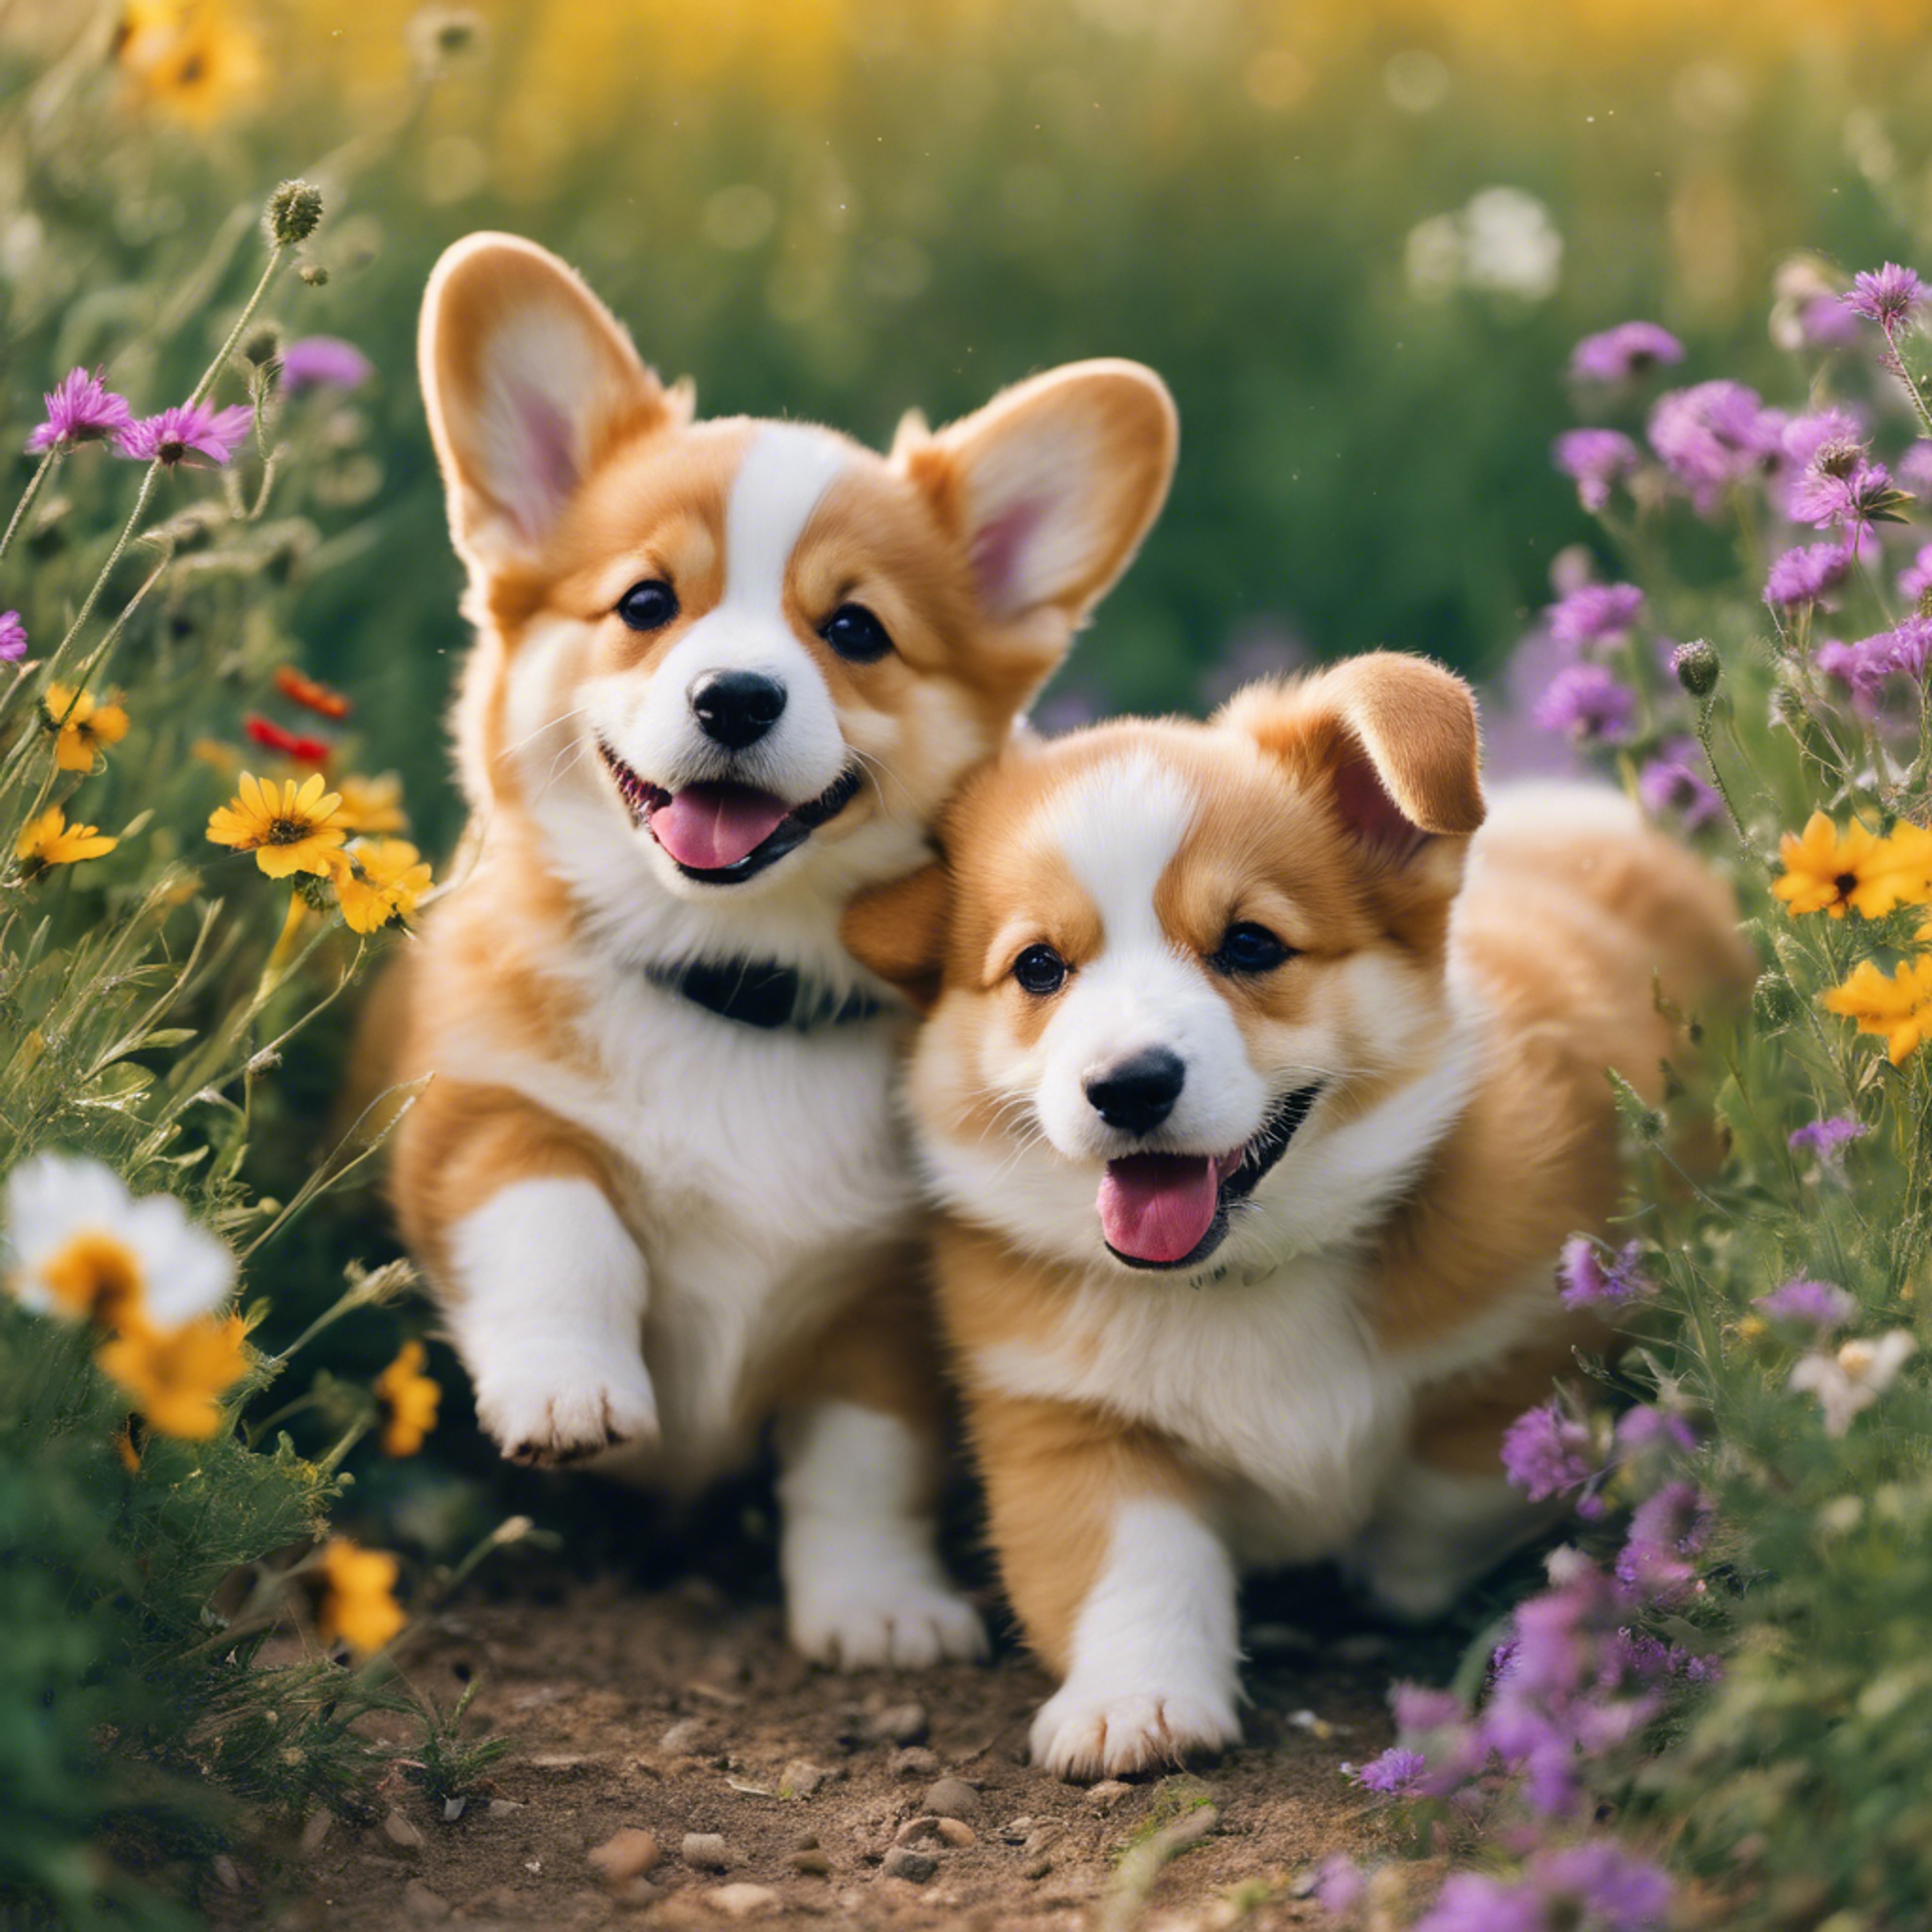 Corgi puppies frolic in a meadow filled with colourful wildflowers. 墙纸[ff39099a16654d489ef7]